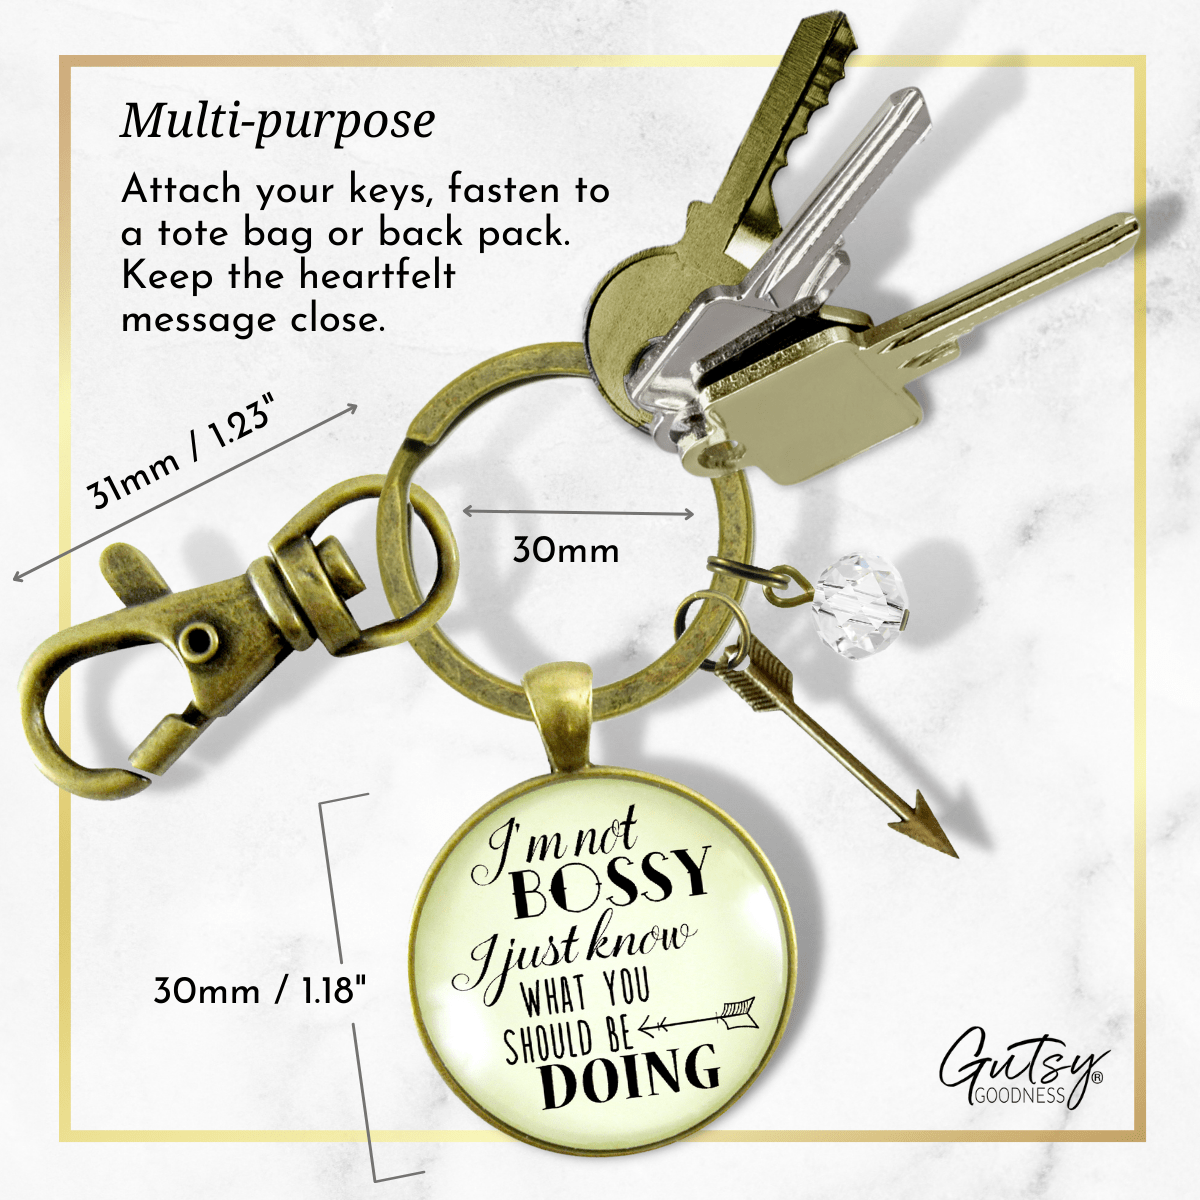 I'm Not Bossy I Just Know What You Should Be Doing Keychain Type A Personality Jewelry Gift - Gutsy Goodness